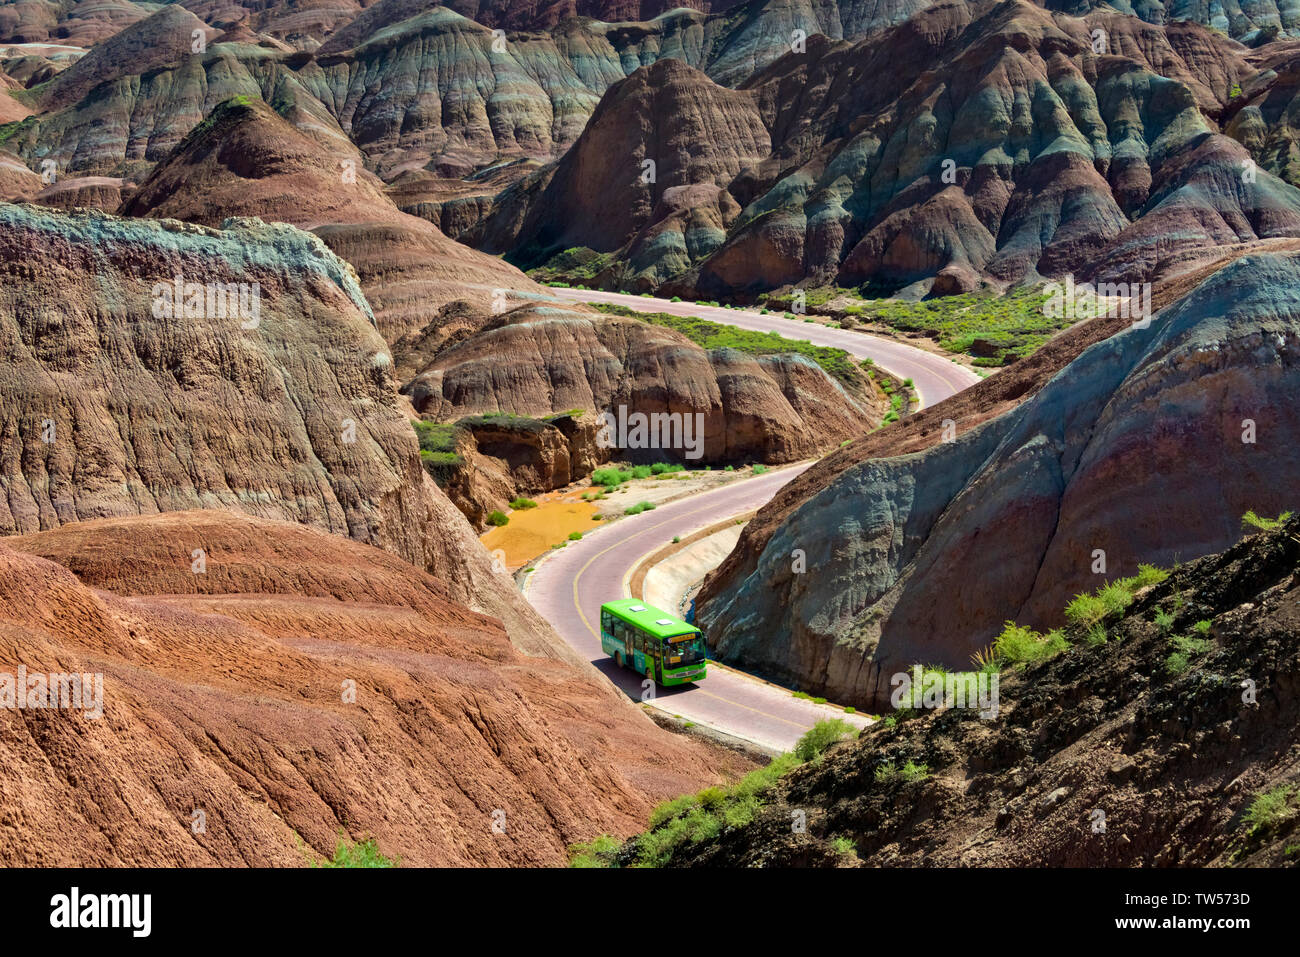 A winding road through the colorful mountains in Zhangye National Geopark, Zhangye, Gansu Province, China Stock Photo